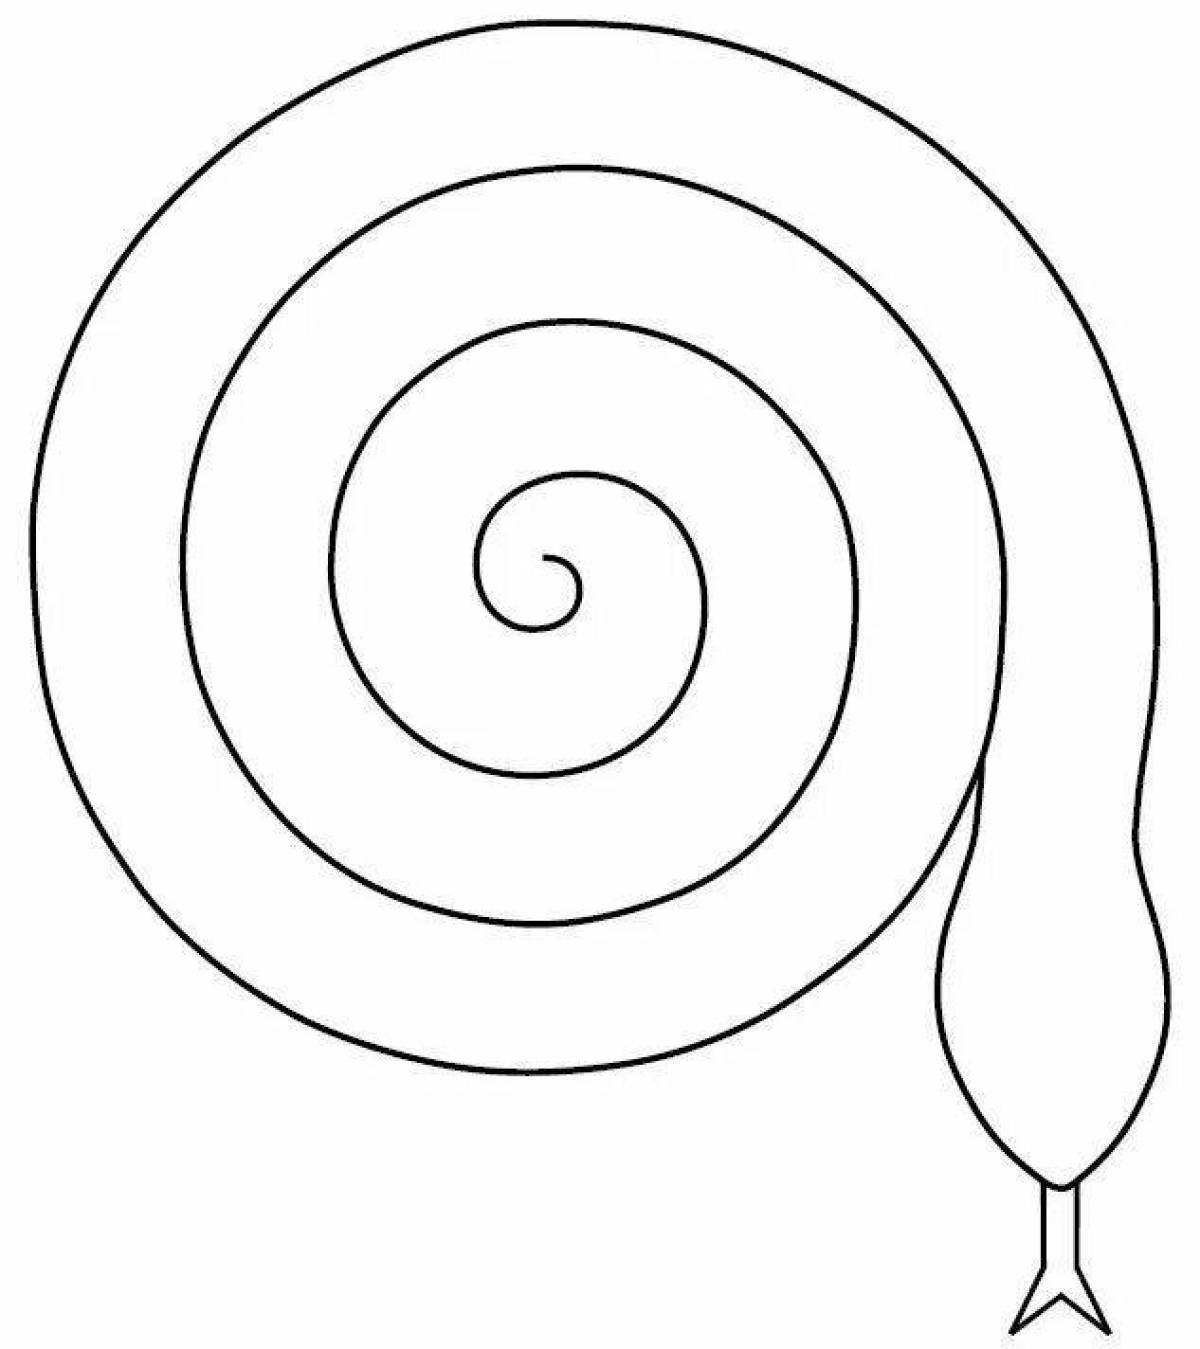 Do-it-yourself amazing spiral coloring book